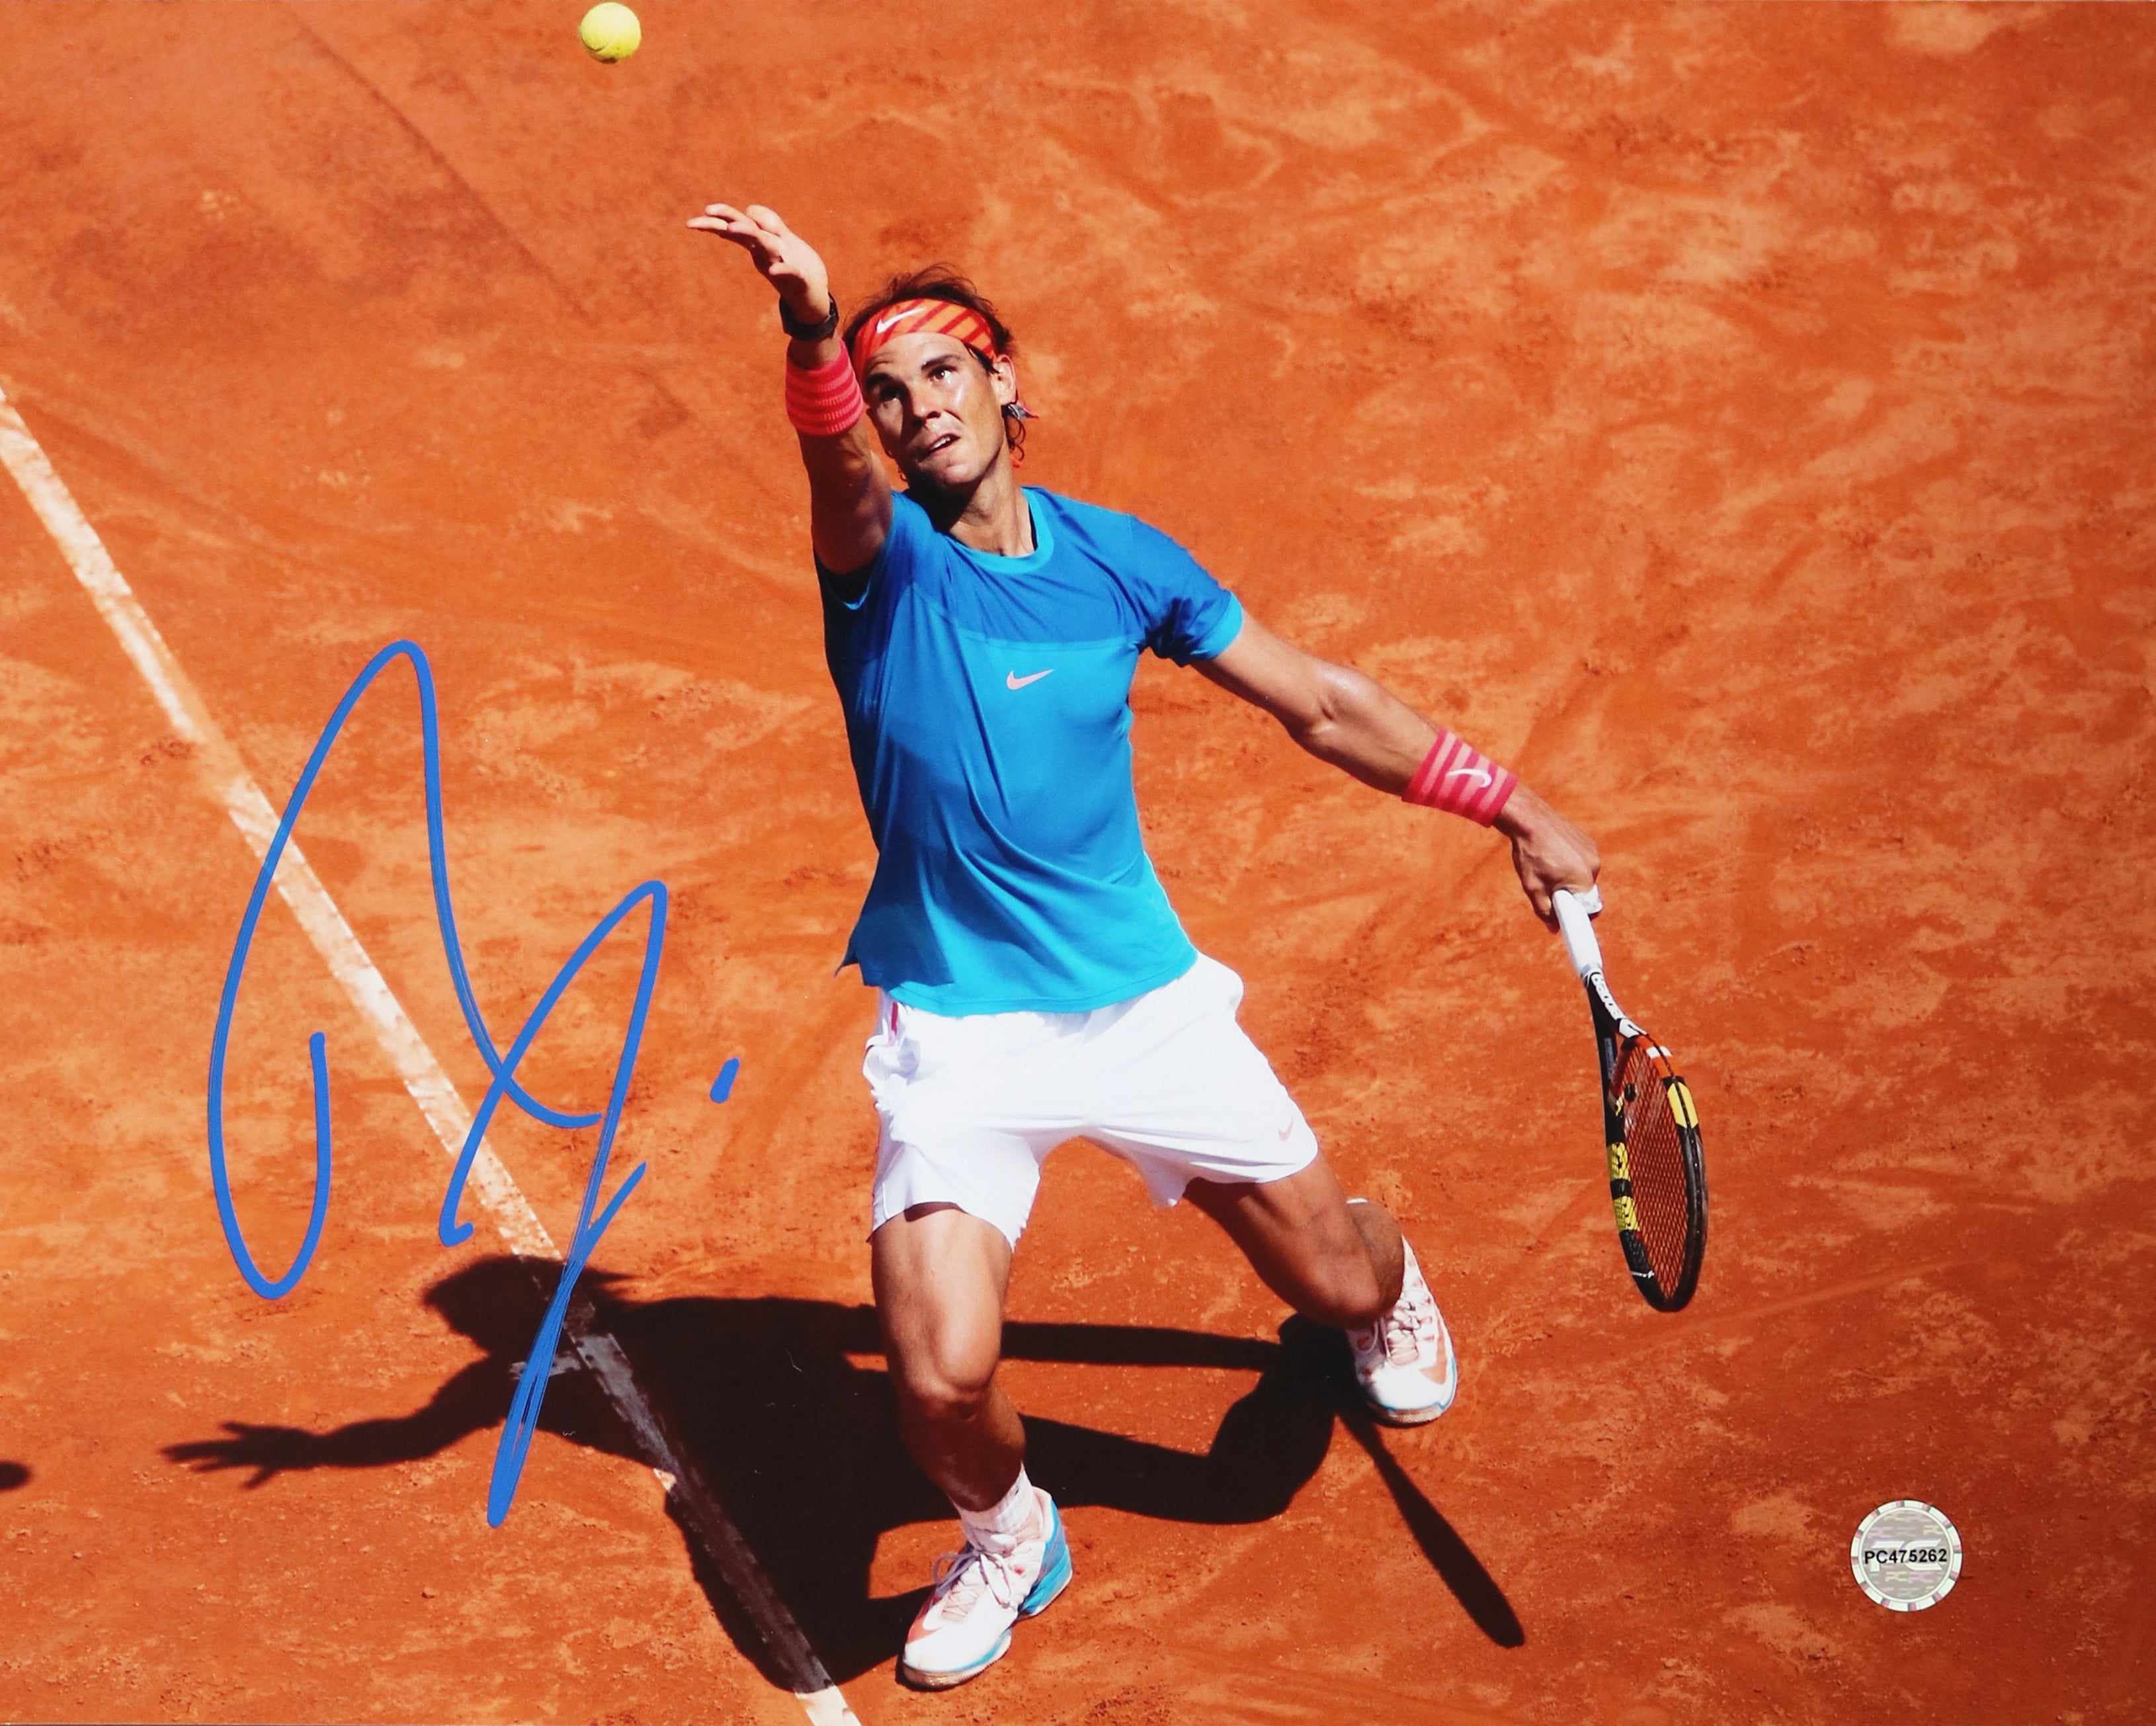 Rafael Nadal Pro Tennis Player Signed Autographed 8